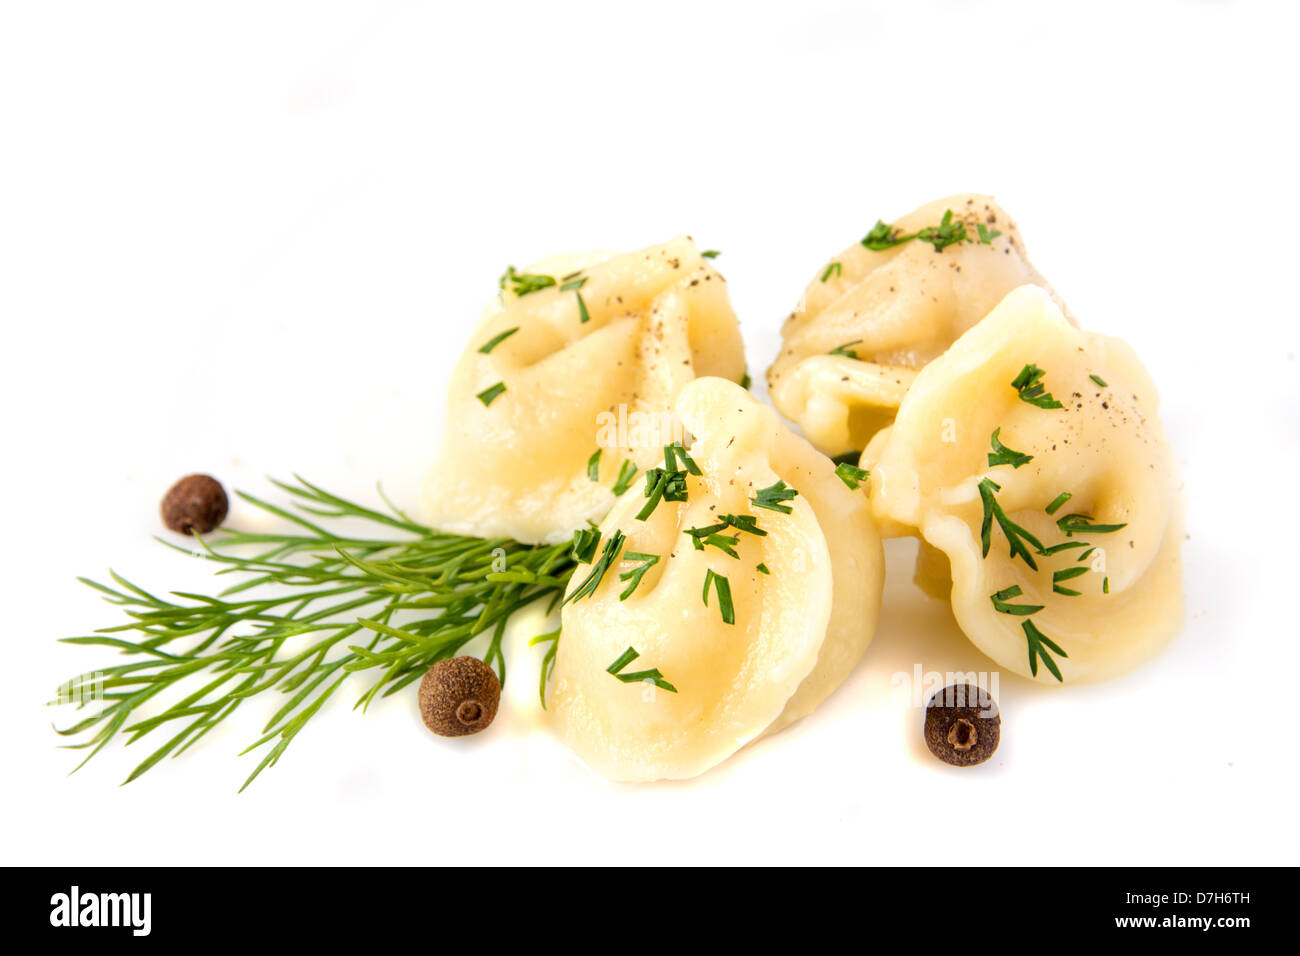 Meat dumplings (pelmeni) with dill (fennel) and pepper isolated on a white background, close up. Stock Photo